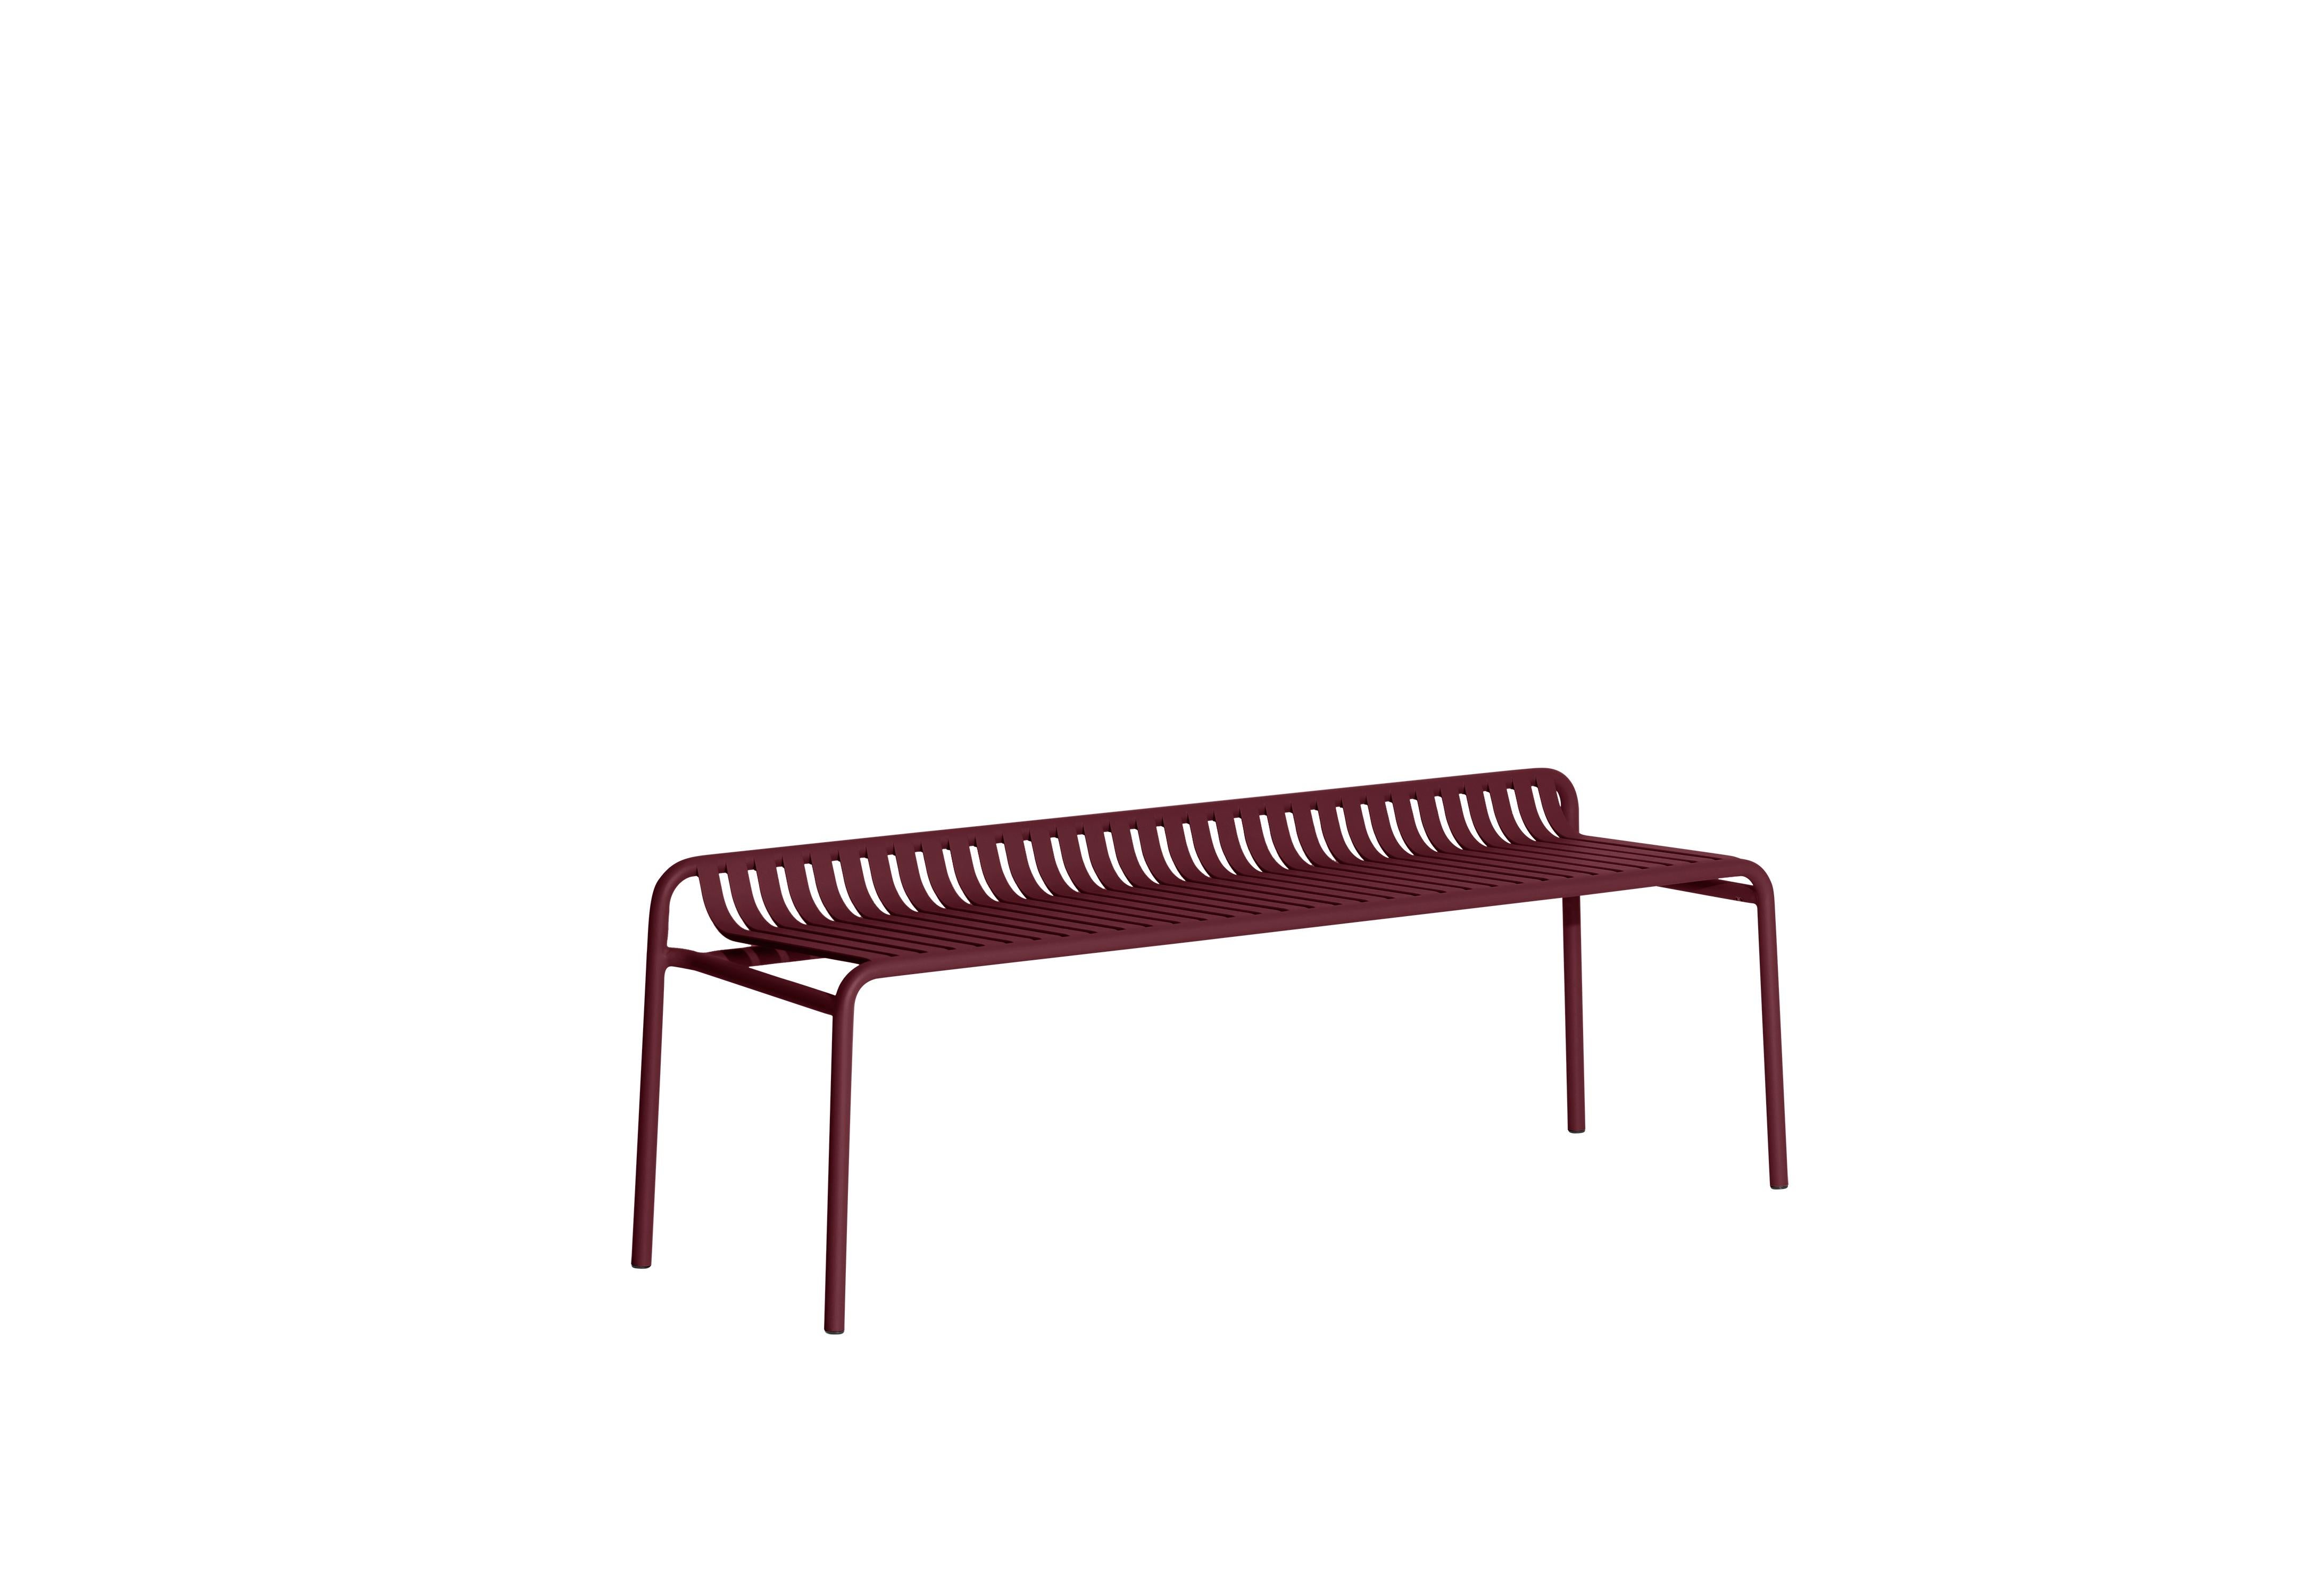 Petite Friture Week-End Bench without Back in Burgundy Aluminium by Studio BrichetZiegler, 2017

The week-end collection is a full range of outdoor furniture, in aluminium grained epoxy paint, matt finish, that includes 18 functions and 8 colours